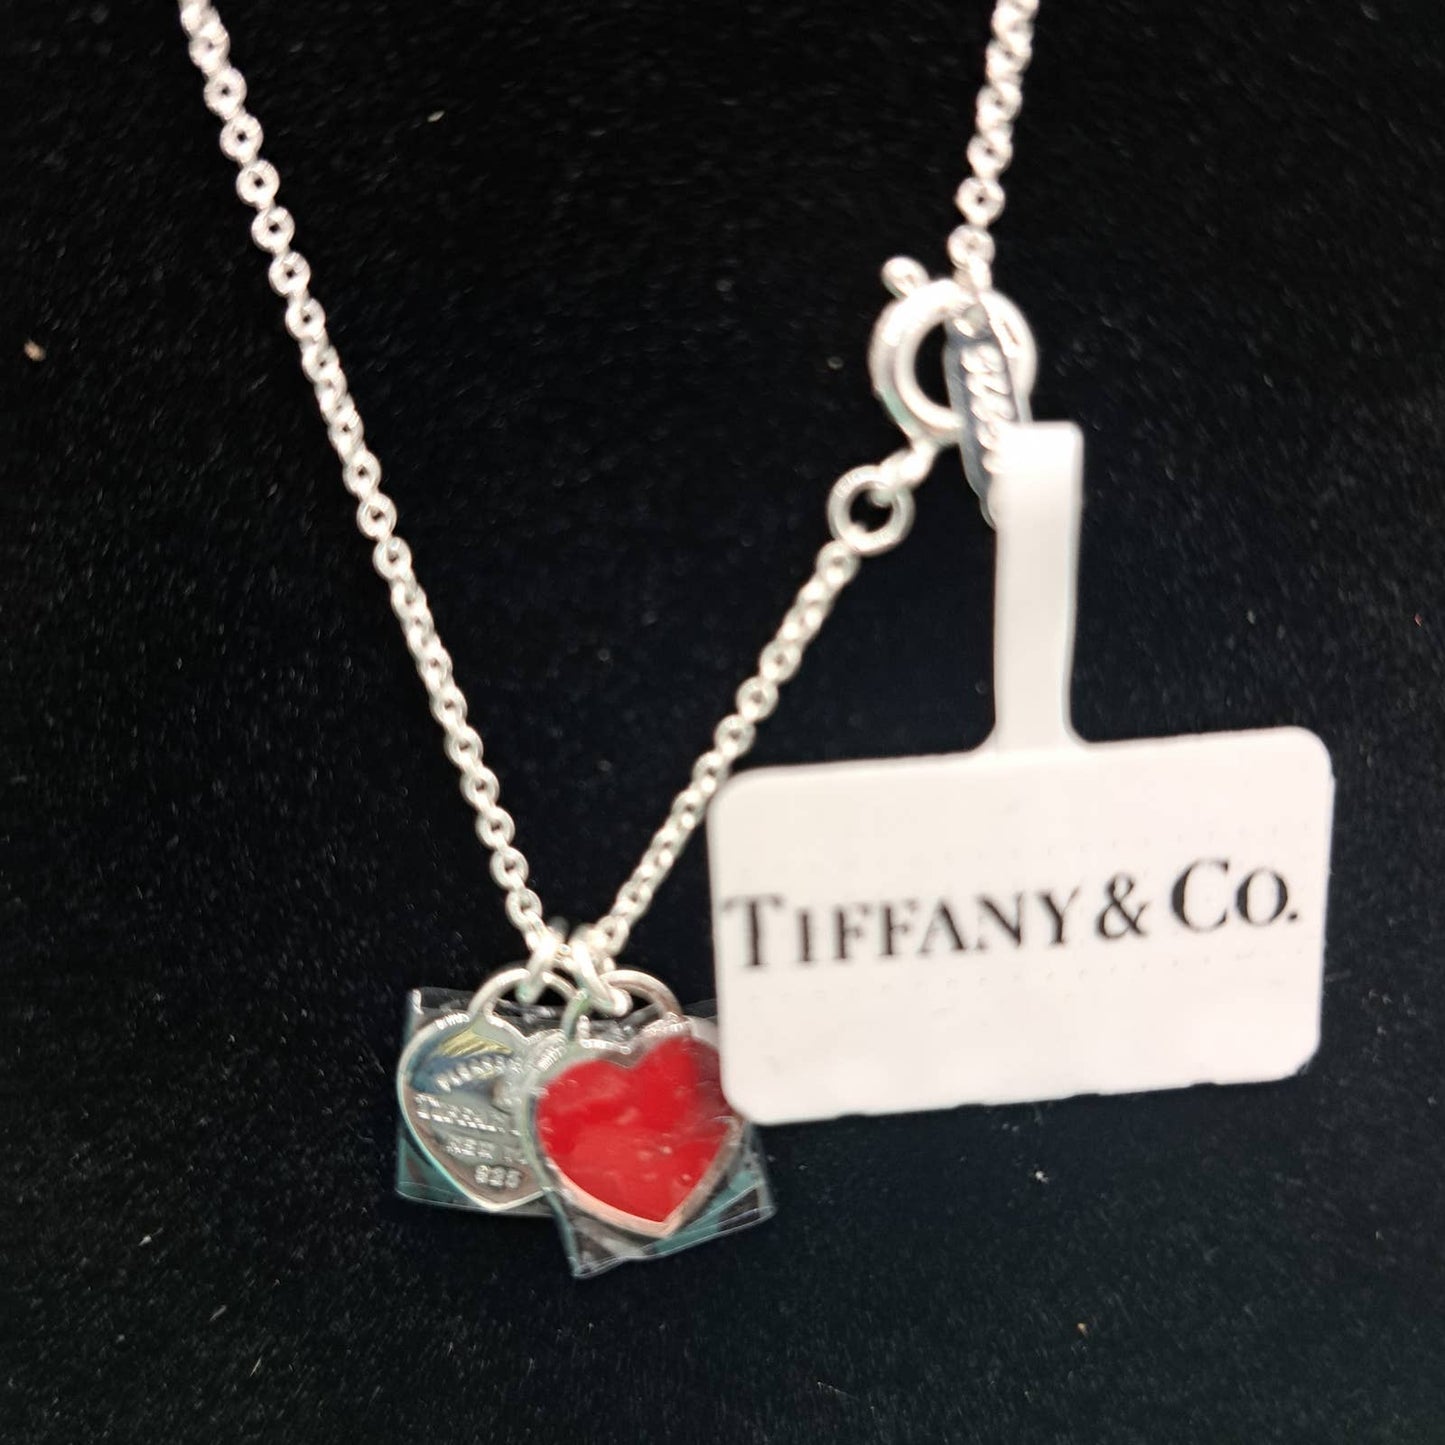 NEW Tiffany & Co. Return to Tiffany Red Double Heart Tag Pendant in Silver with Tiffany bag and box